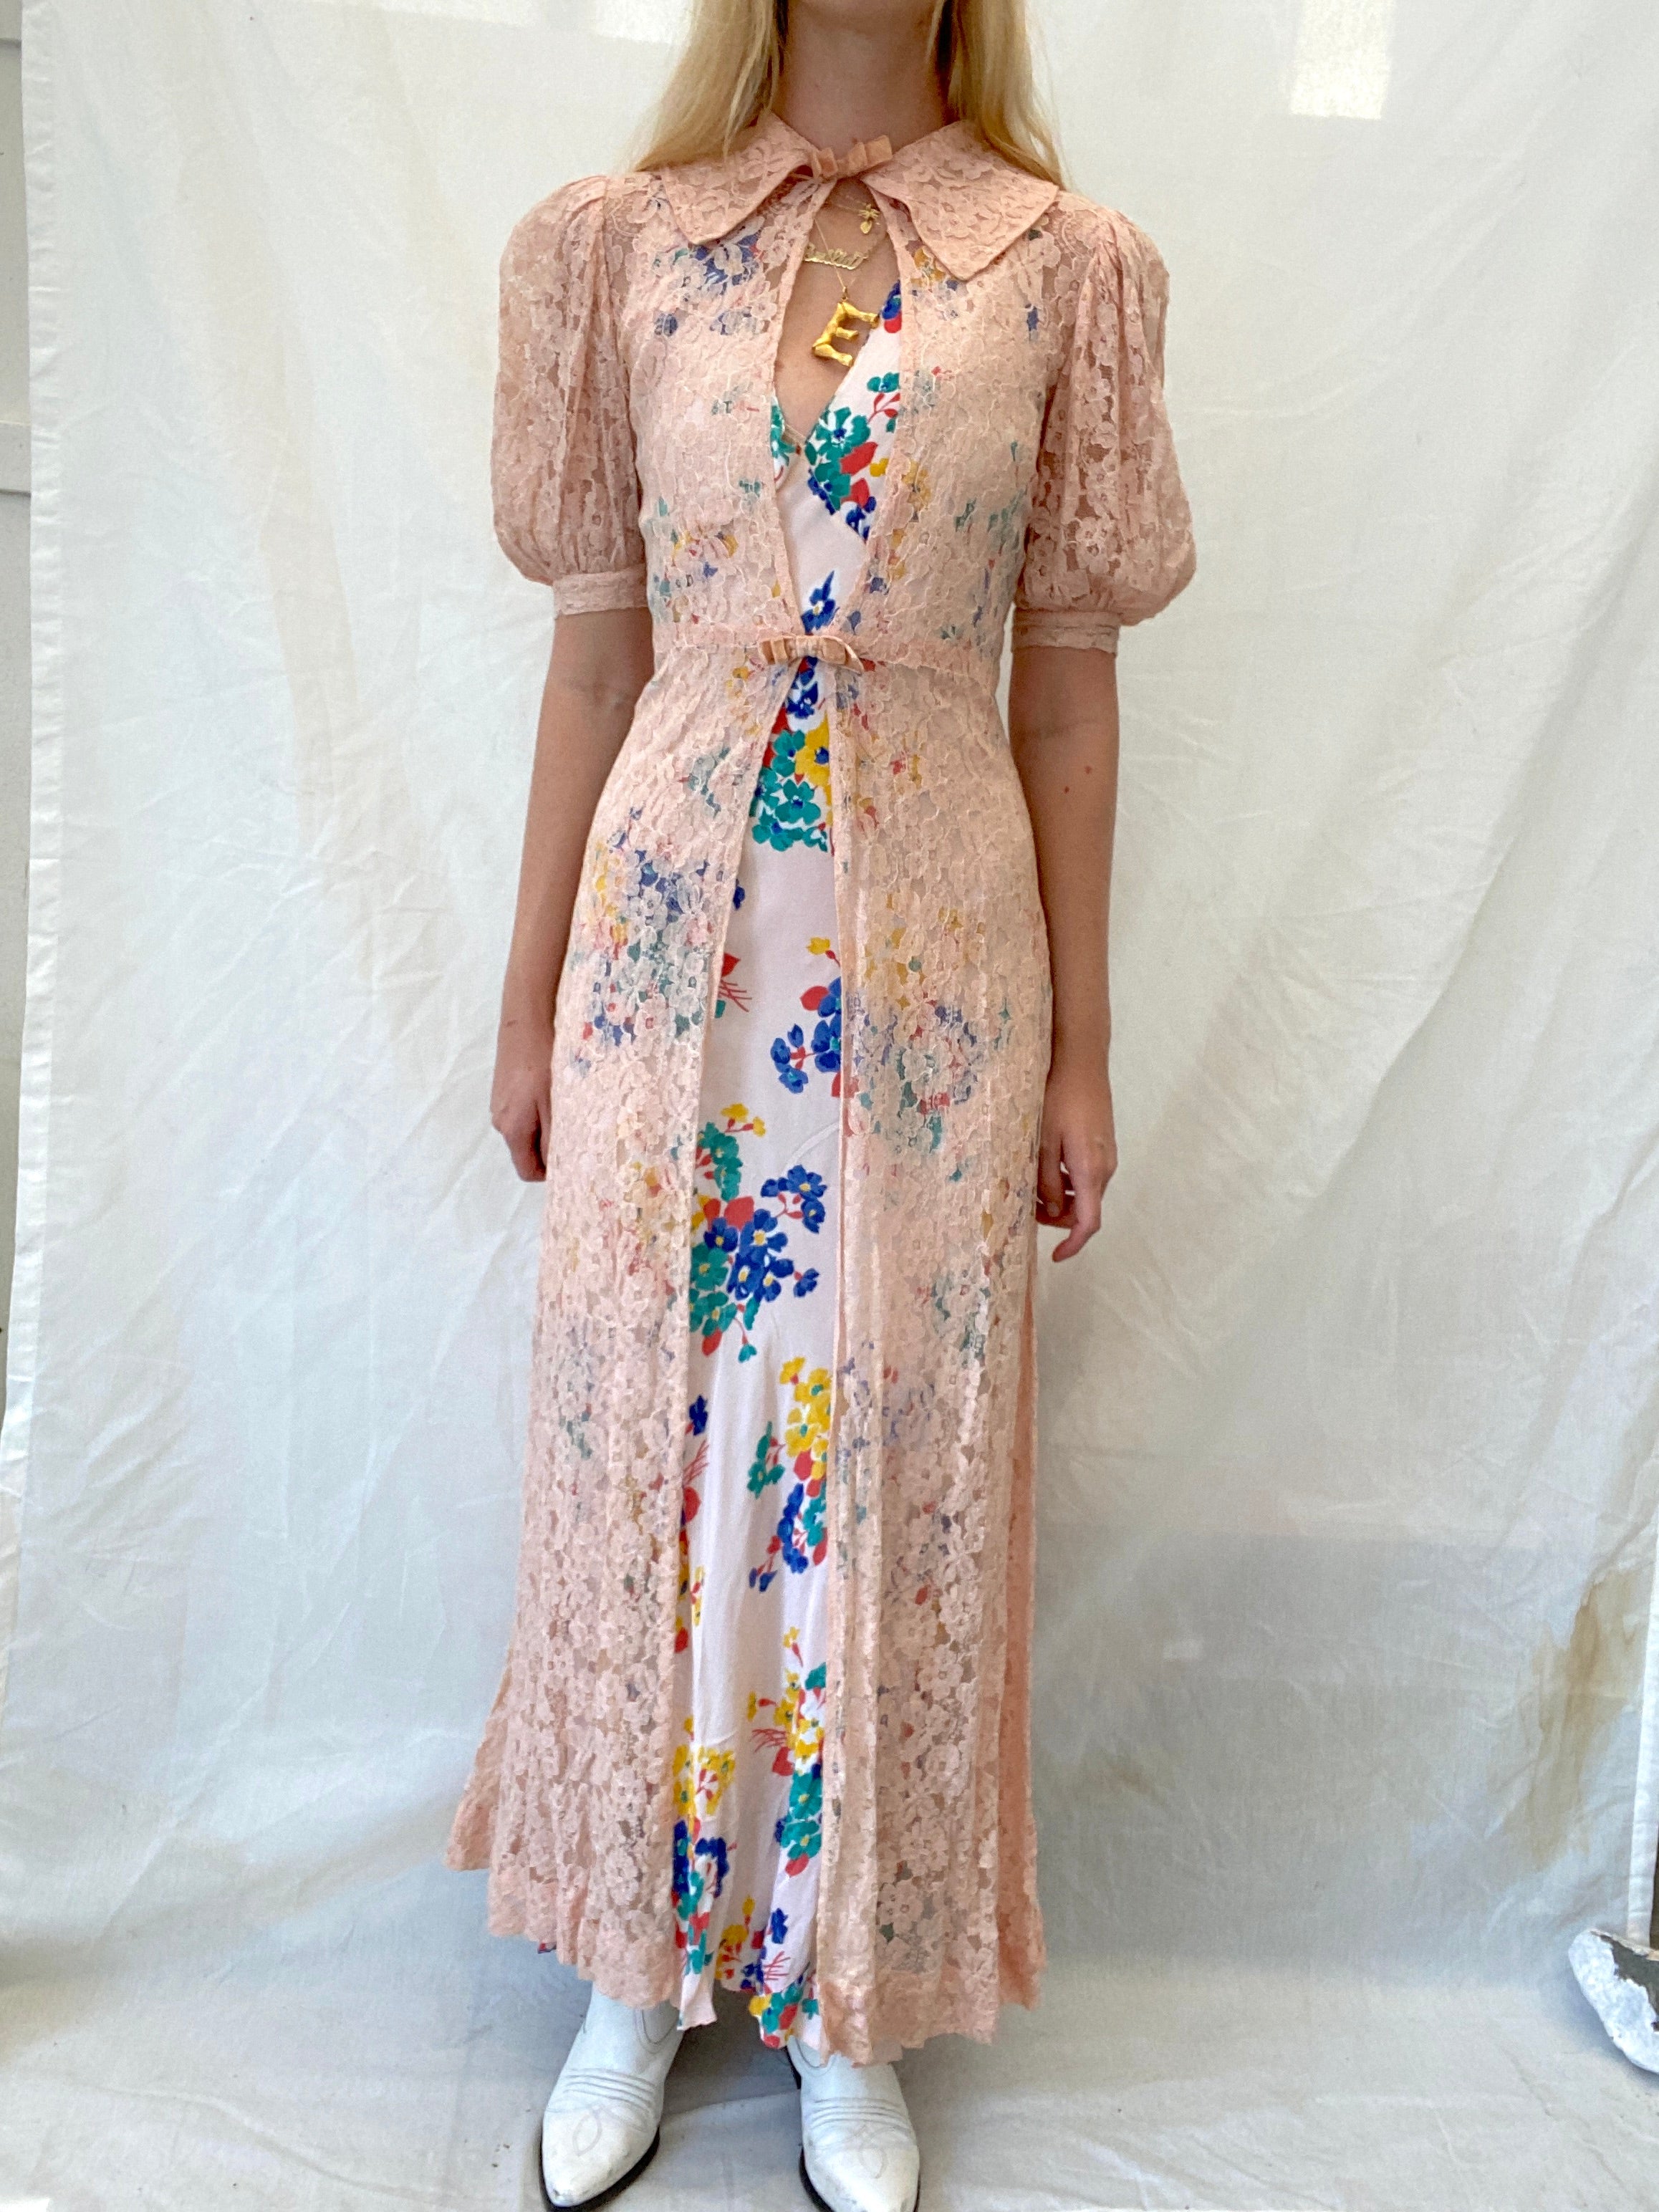 1930's Pink Lace Robe with Velvet Ribbons